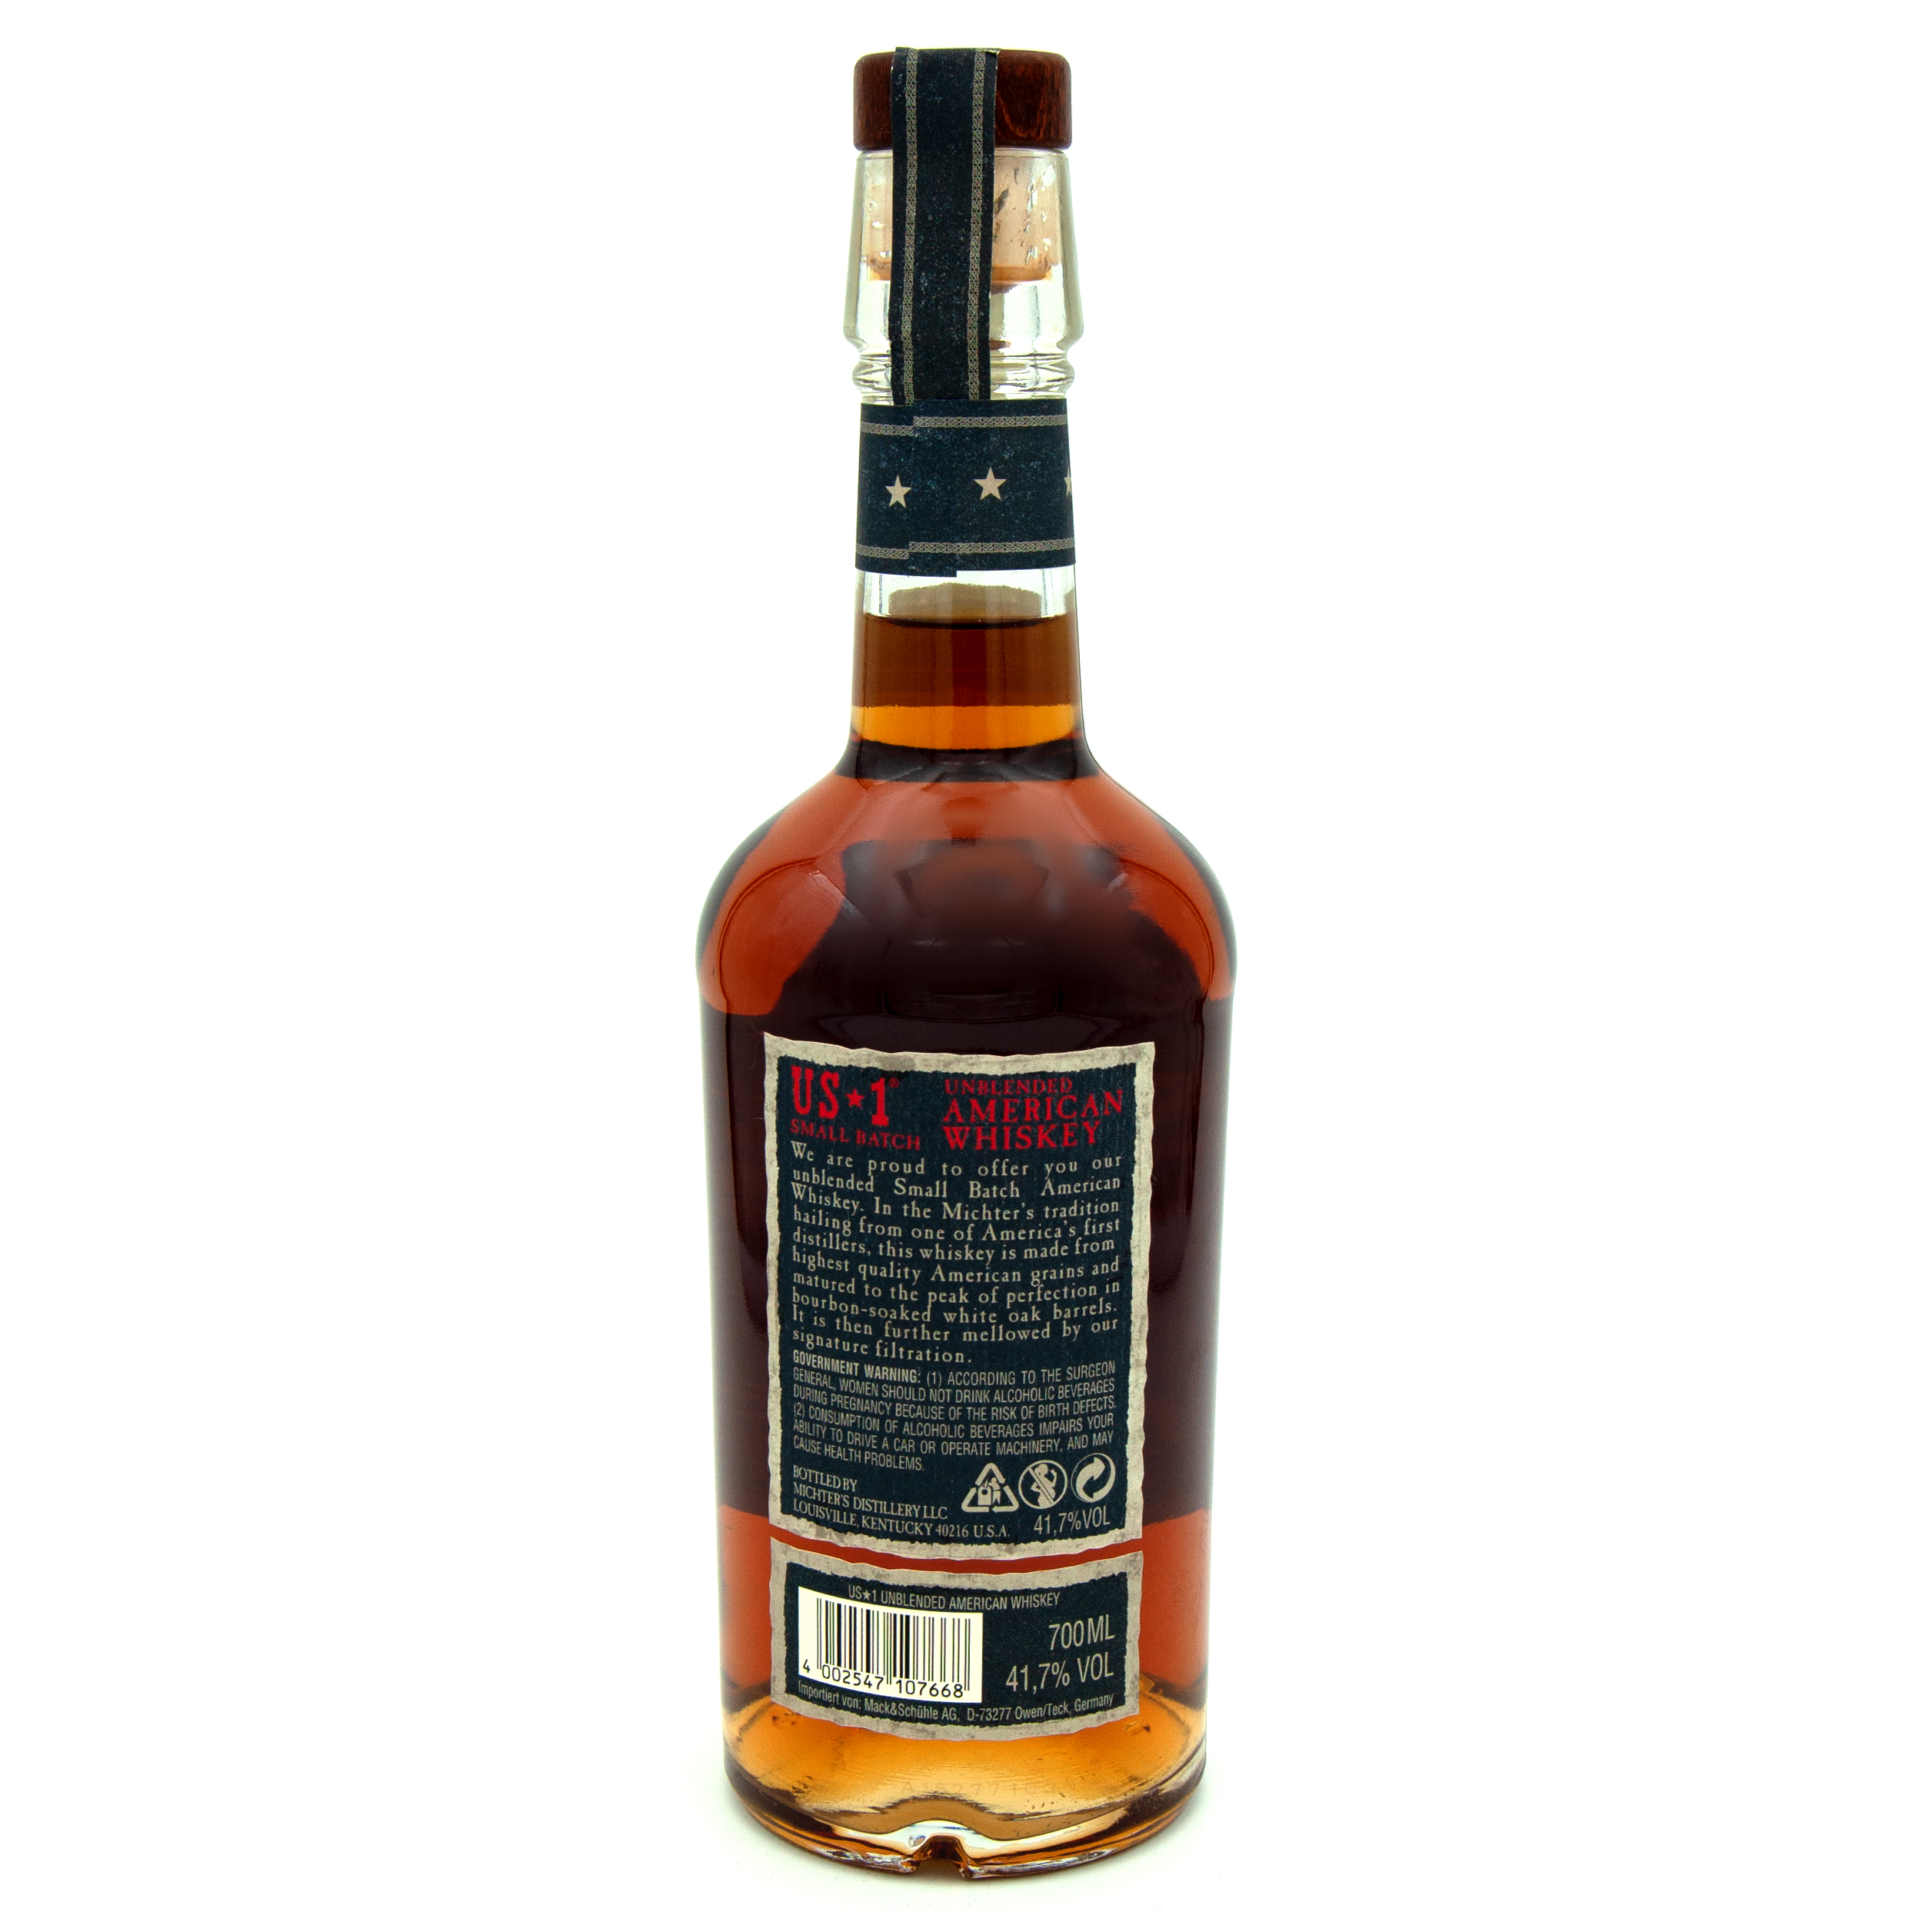 Michter's US*1 Small Batch Unblended American Whiskey 41,7% 0,7l